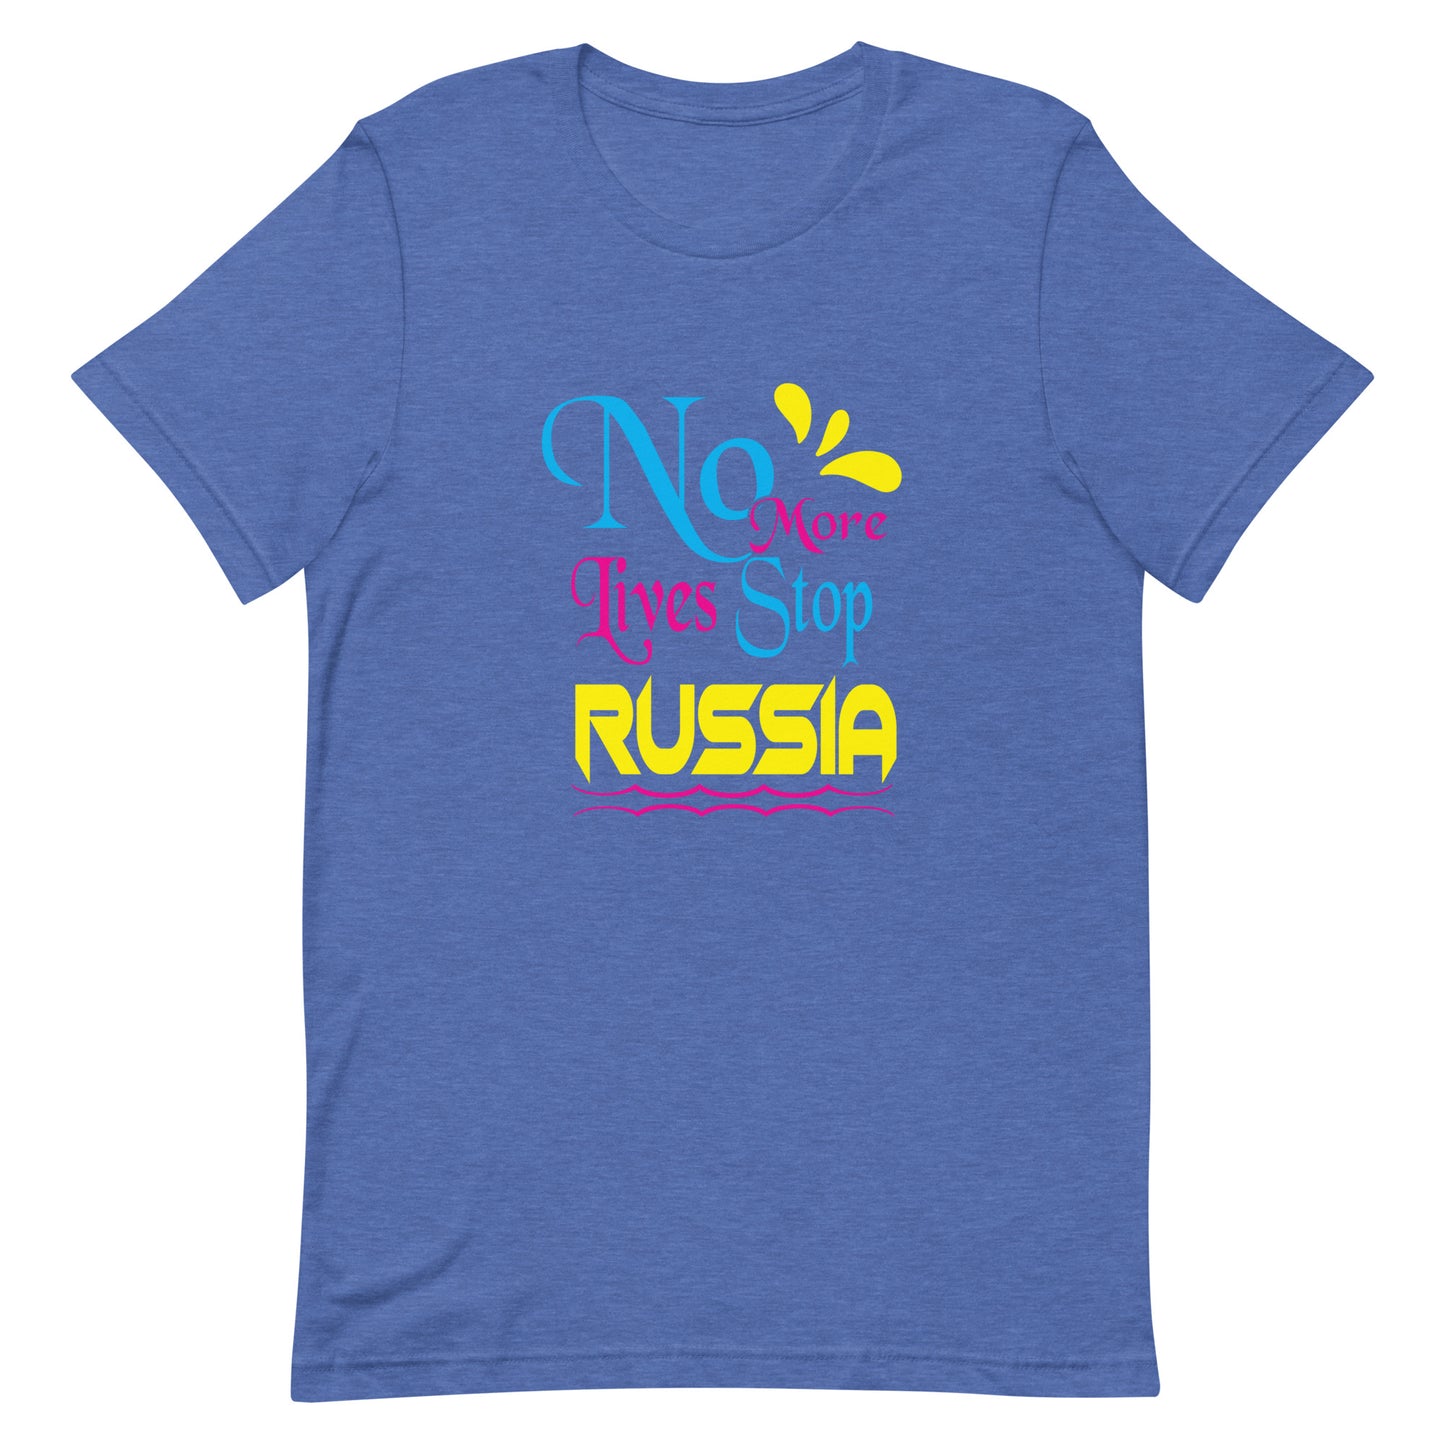 No more lives stop Russia | Unisex t-shirt